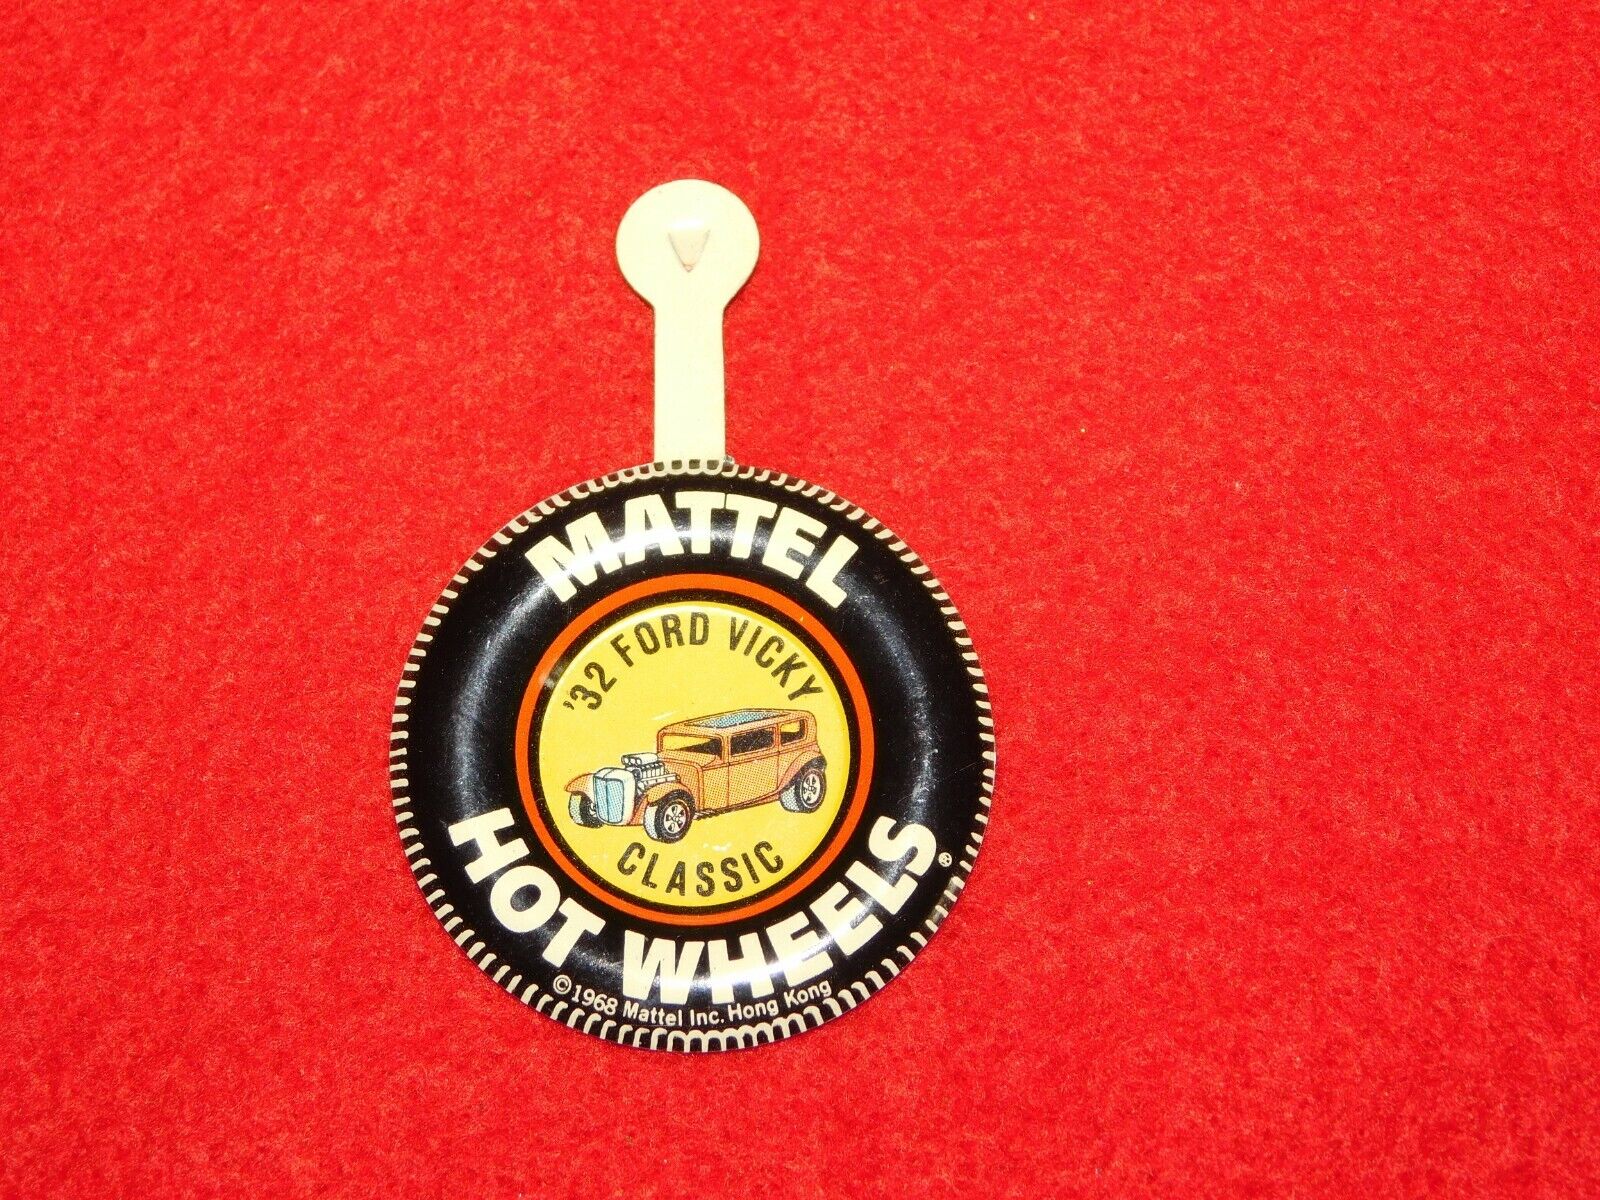 VINTAGE FOLD BEND BACK BUTTON MATTEL HOT WHEELS 32 FORD VICKY CLASSIC